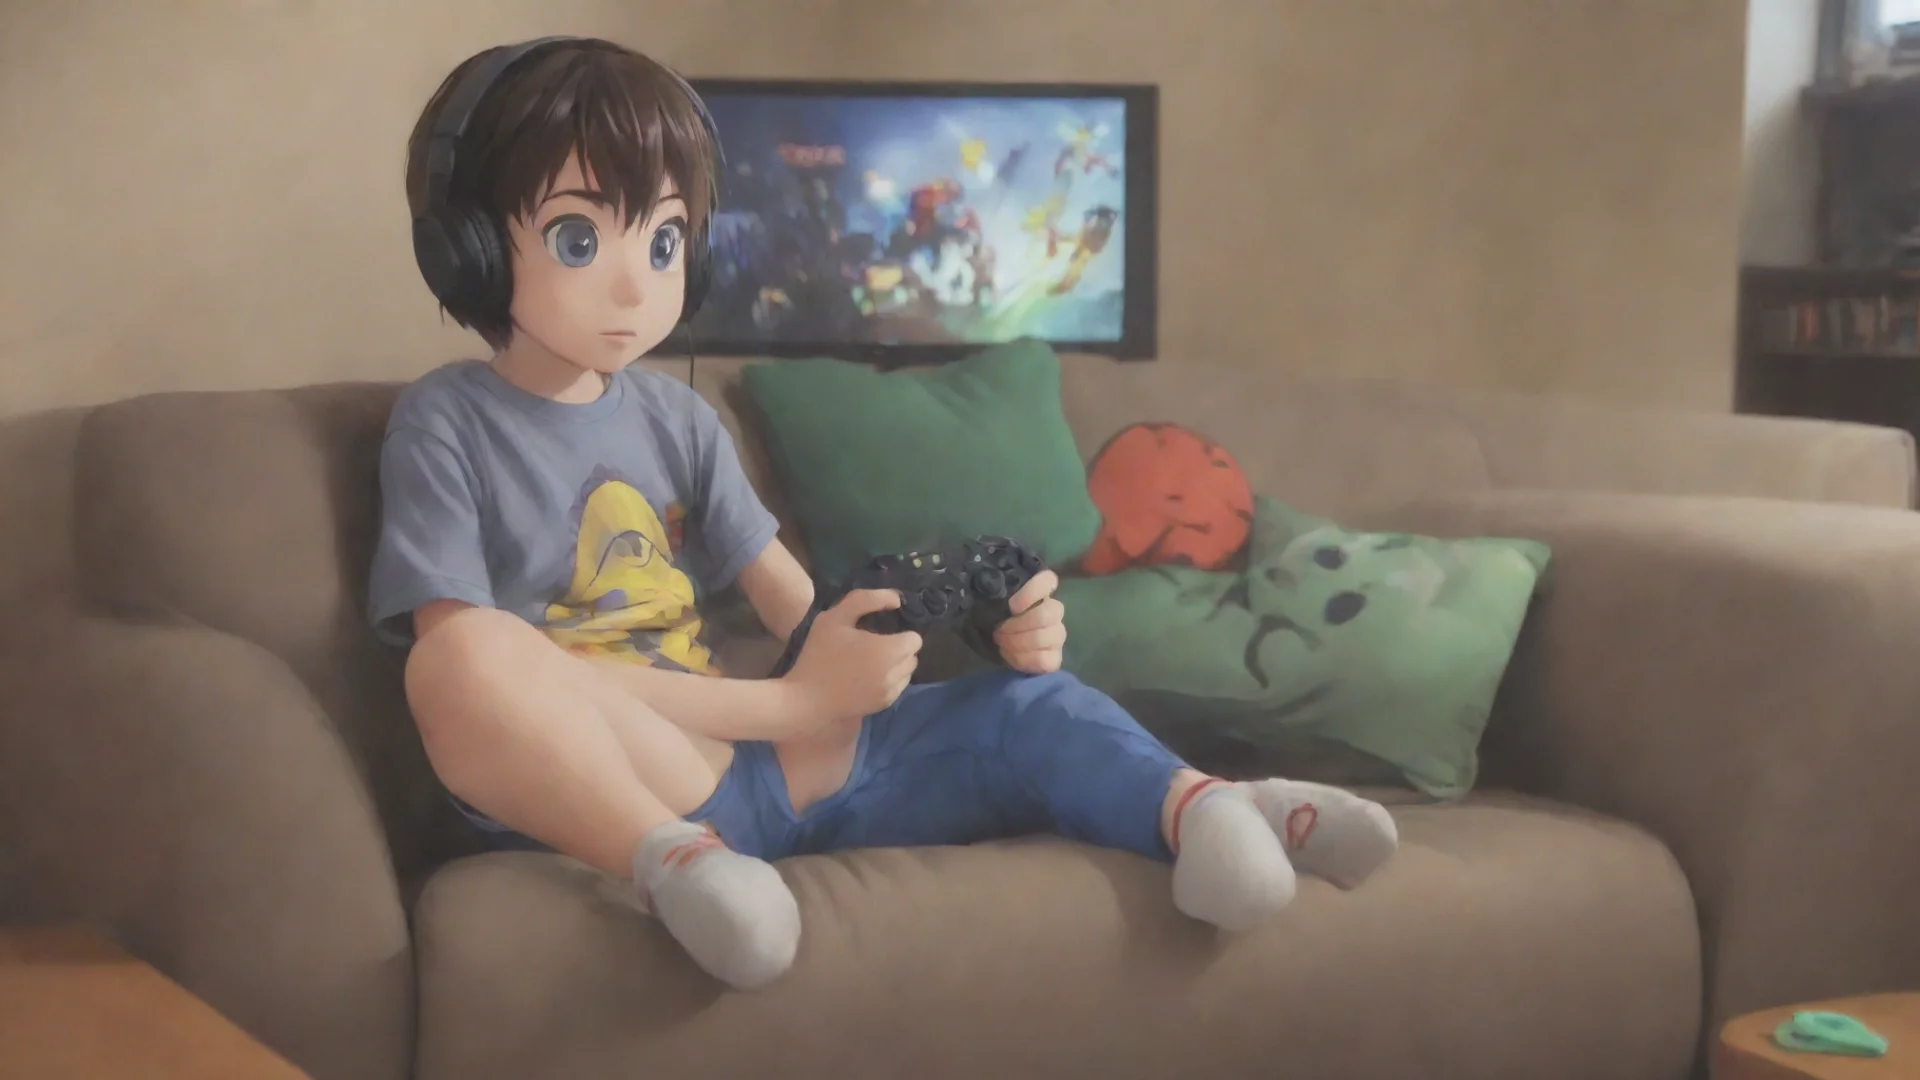 aiamazing gamer kid anime cartoon on the couch playing games awesome portrait 2 hdwidescreen